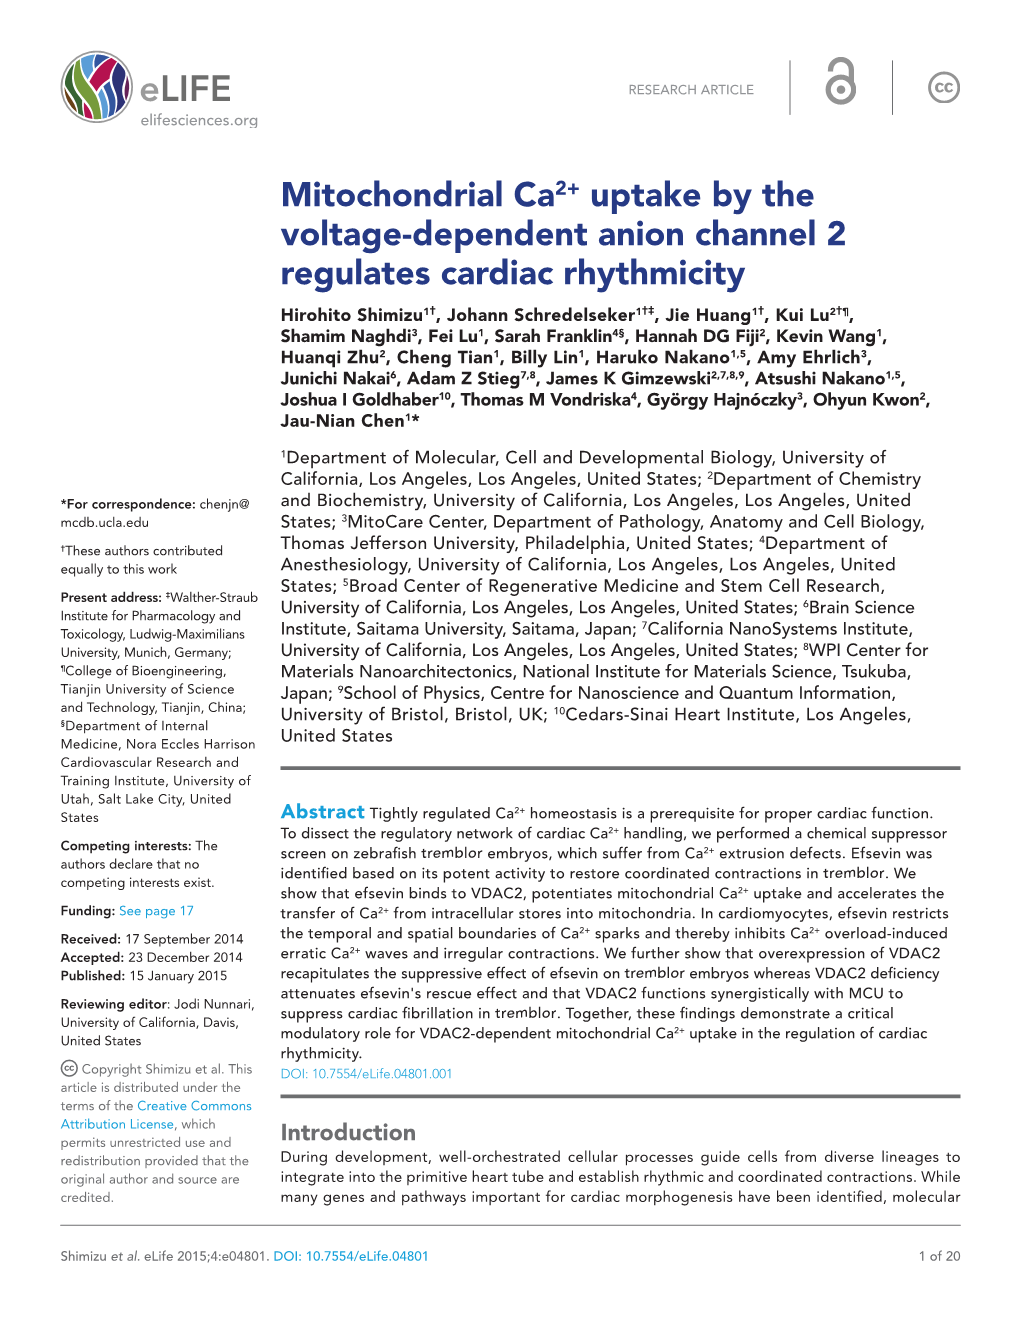 Mitochondrial Ca2+ Uptake by the Voltage-Dependent Anion Channel 2